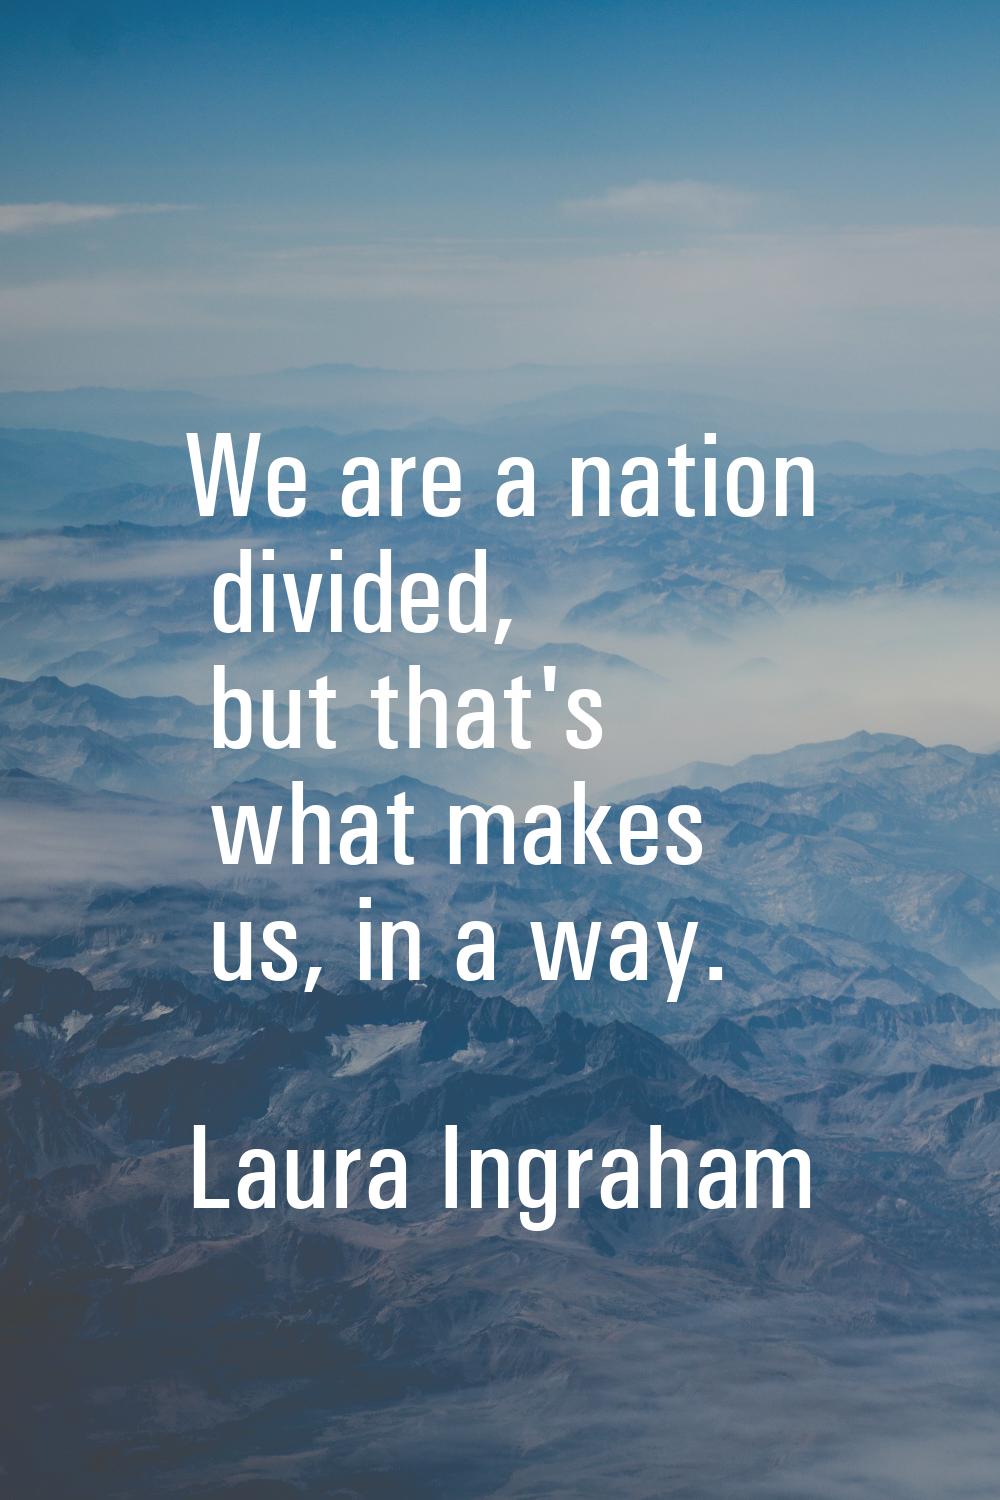 We are a nation divided, but that's what makes us, in a way.